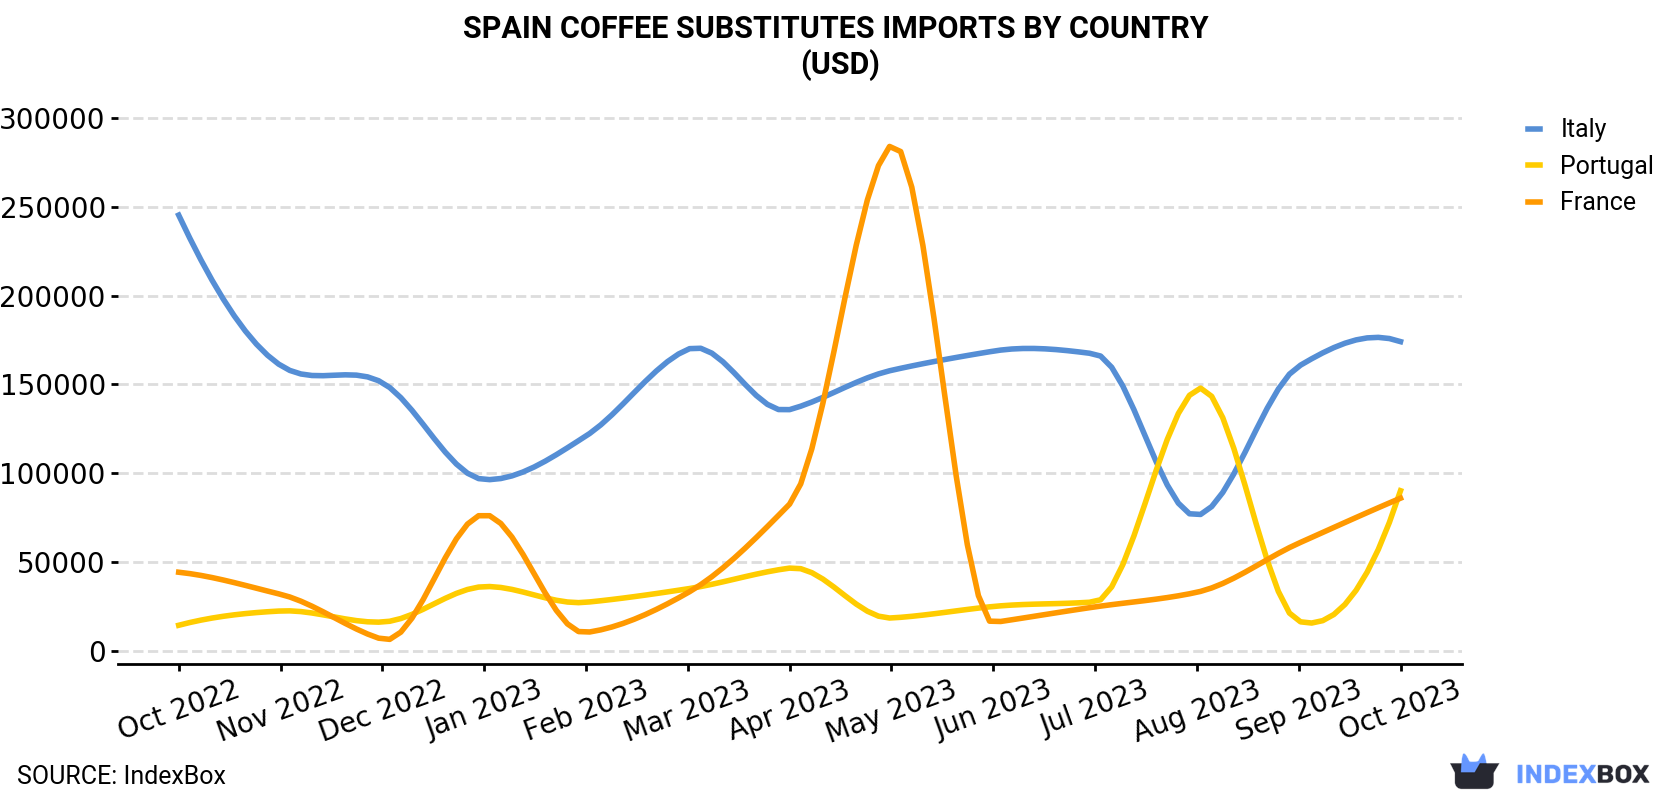 Spain Coffee Substitutes Imports By Country (USD)